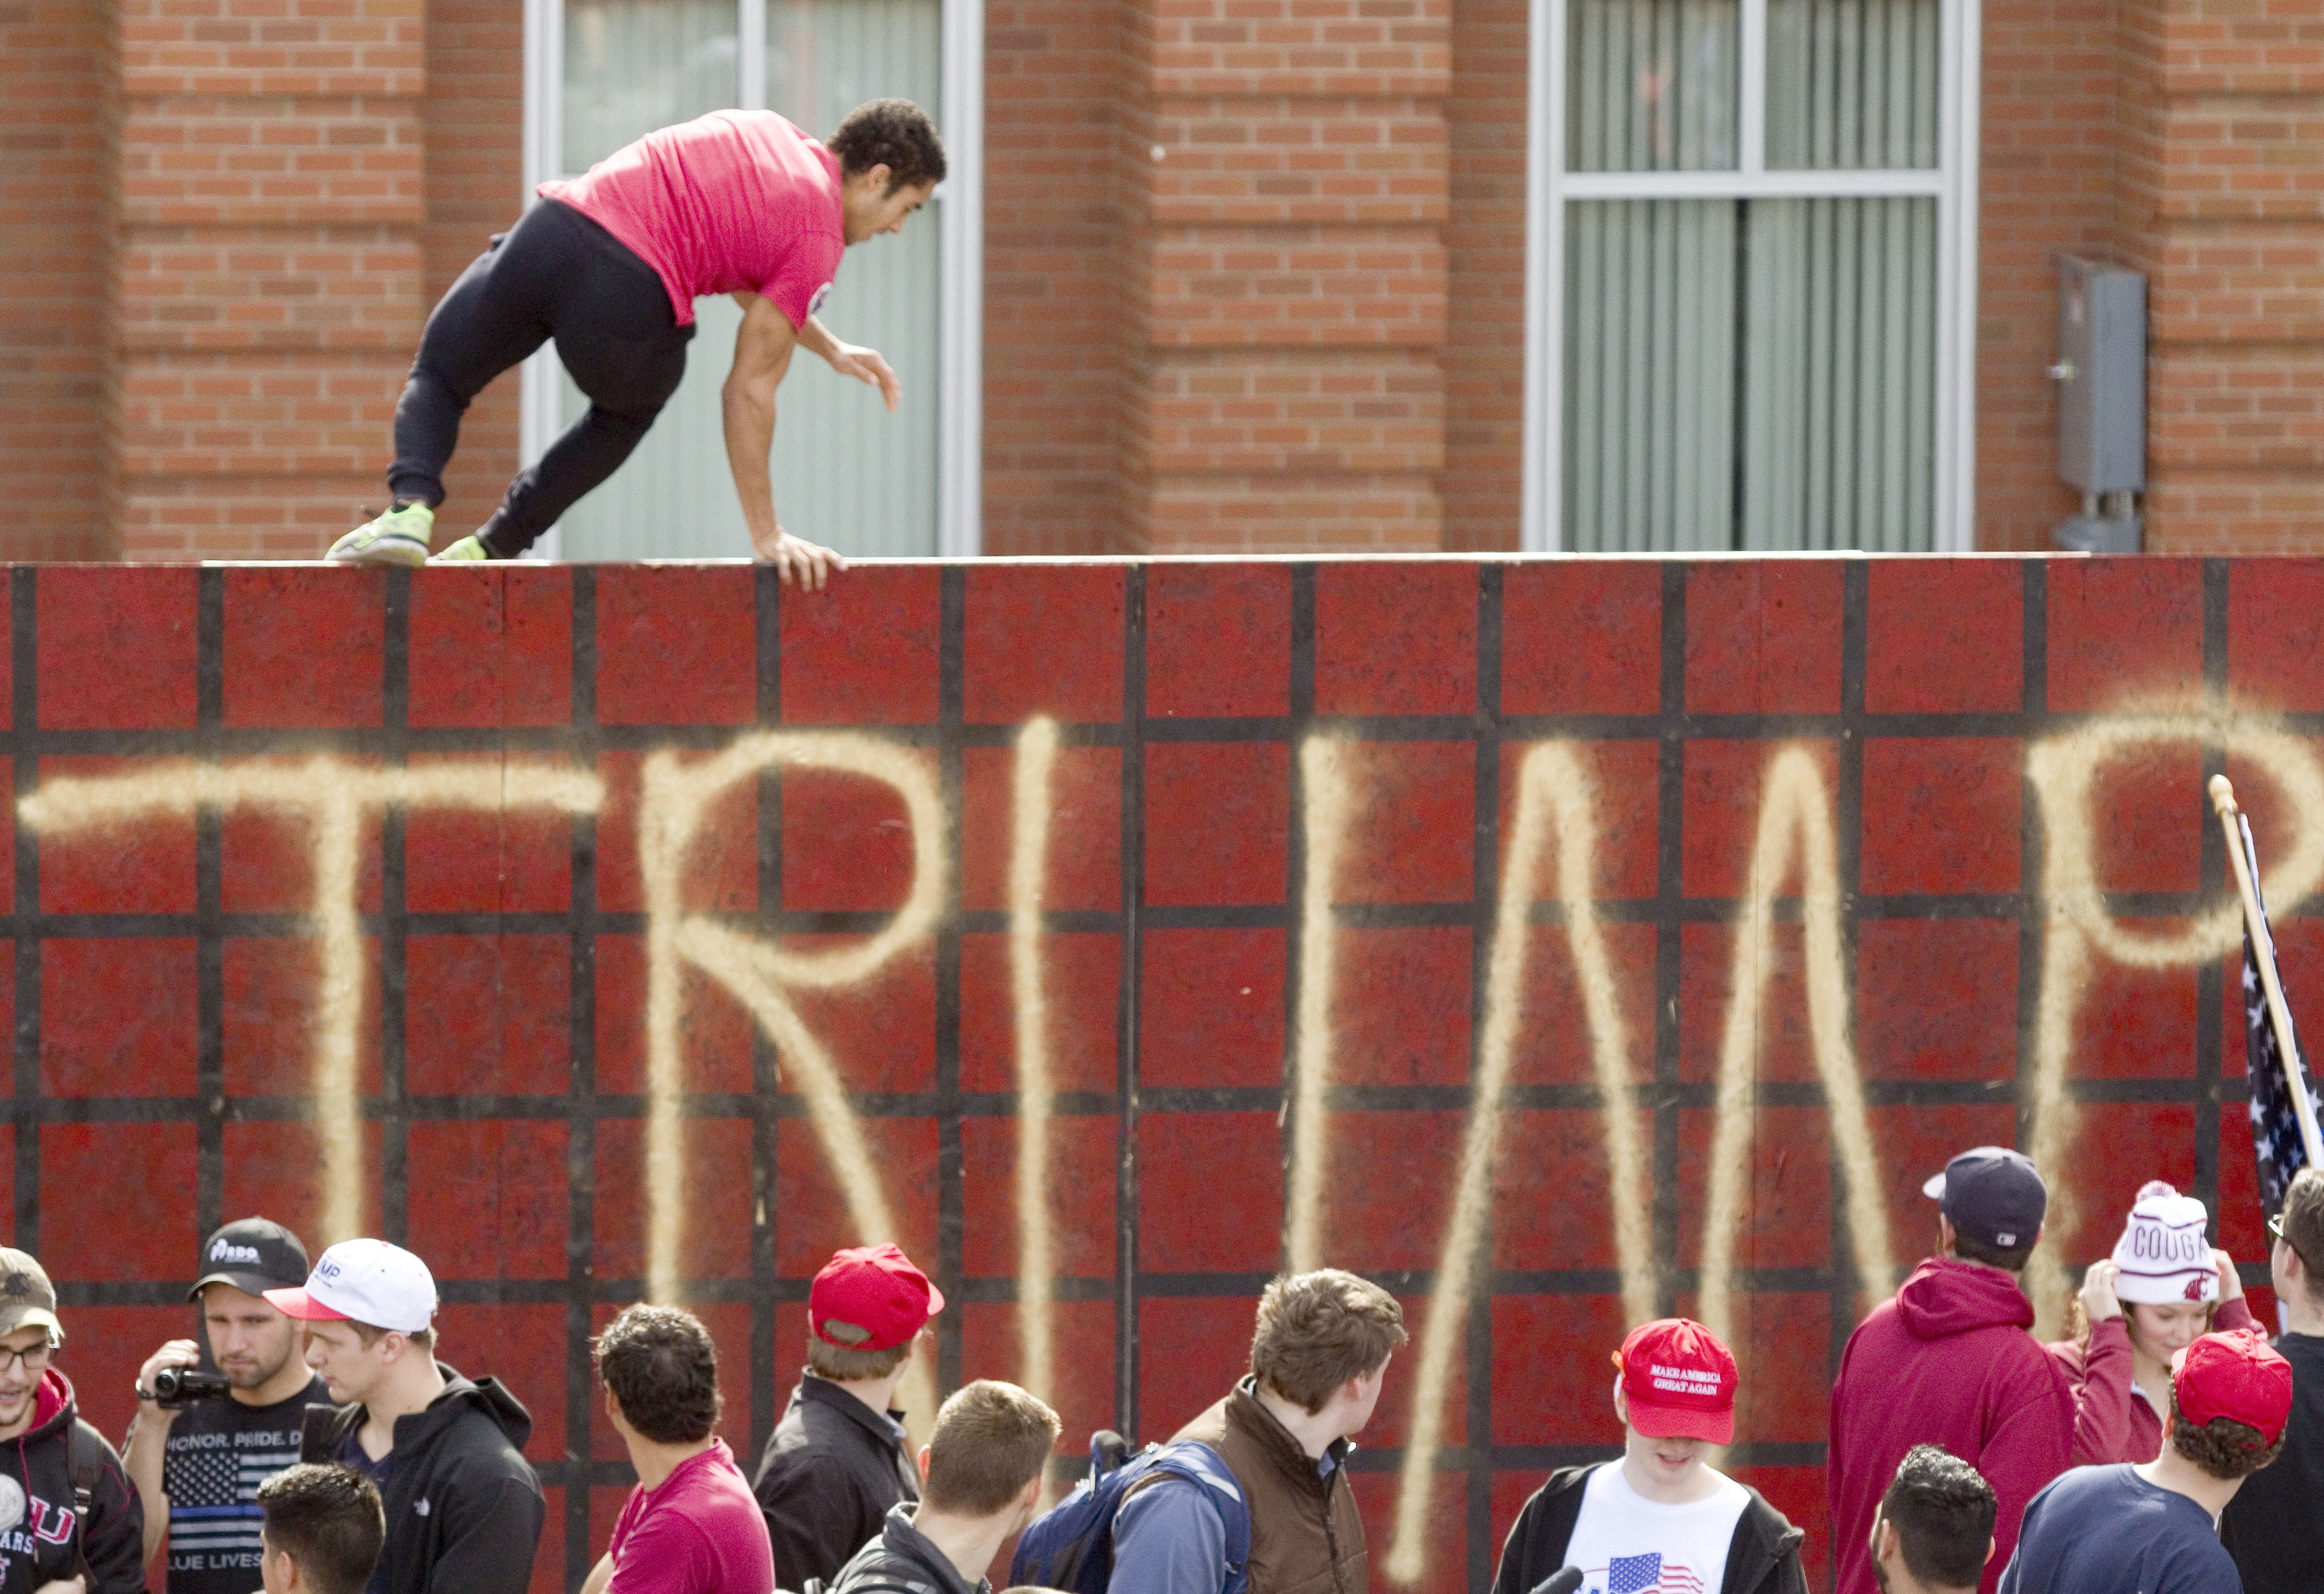 Counter-protester Demietrich Baker jumps over a Trump wall erected by the Washington State University College Republicans on campus on Wednesday, Oct. 19, 2016, in Pullman, Wash. Baker said he was trying to demonstrate that a wall along the country's souther border would be dehumanizing and wouldn't stop illegal immigration. The wall was erected in support of Donald Trump's proposal to build a wall along the border with Mexico.